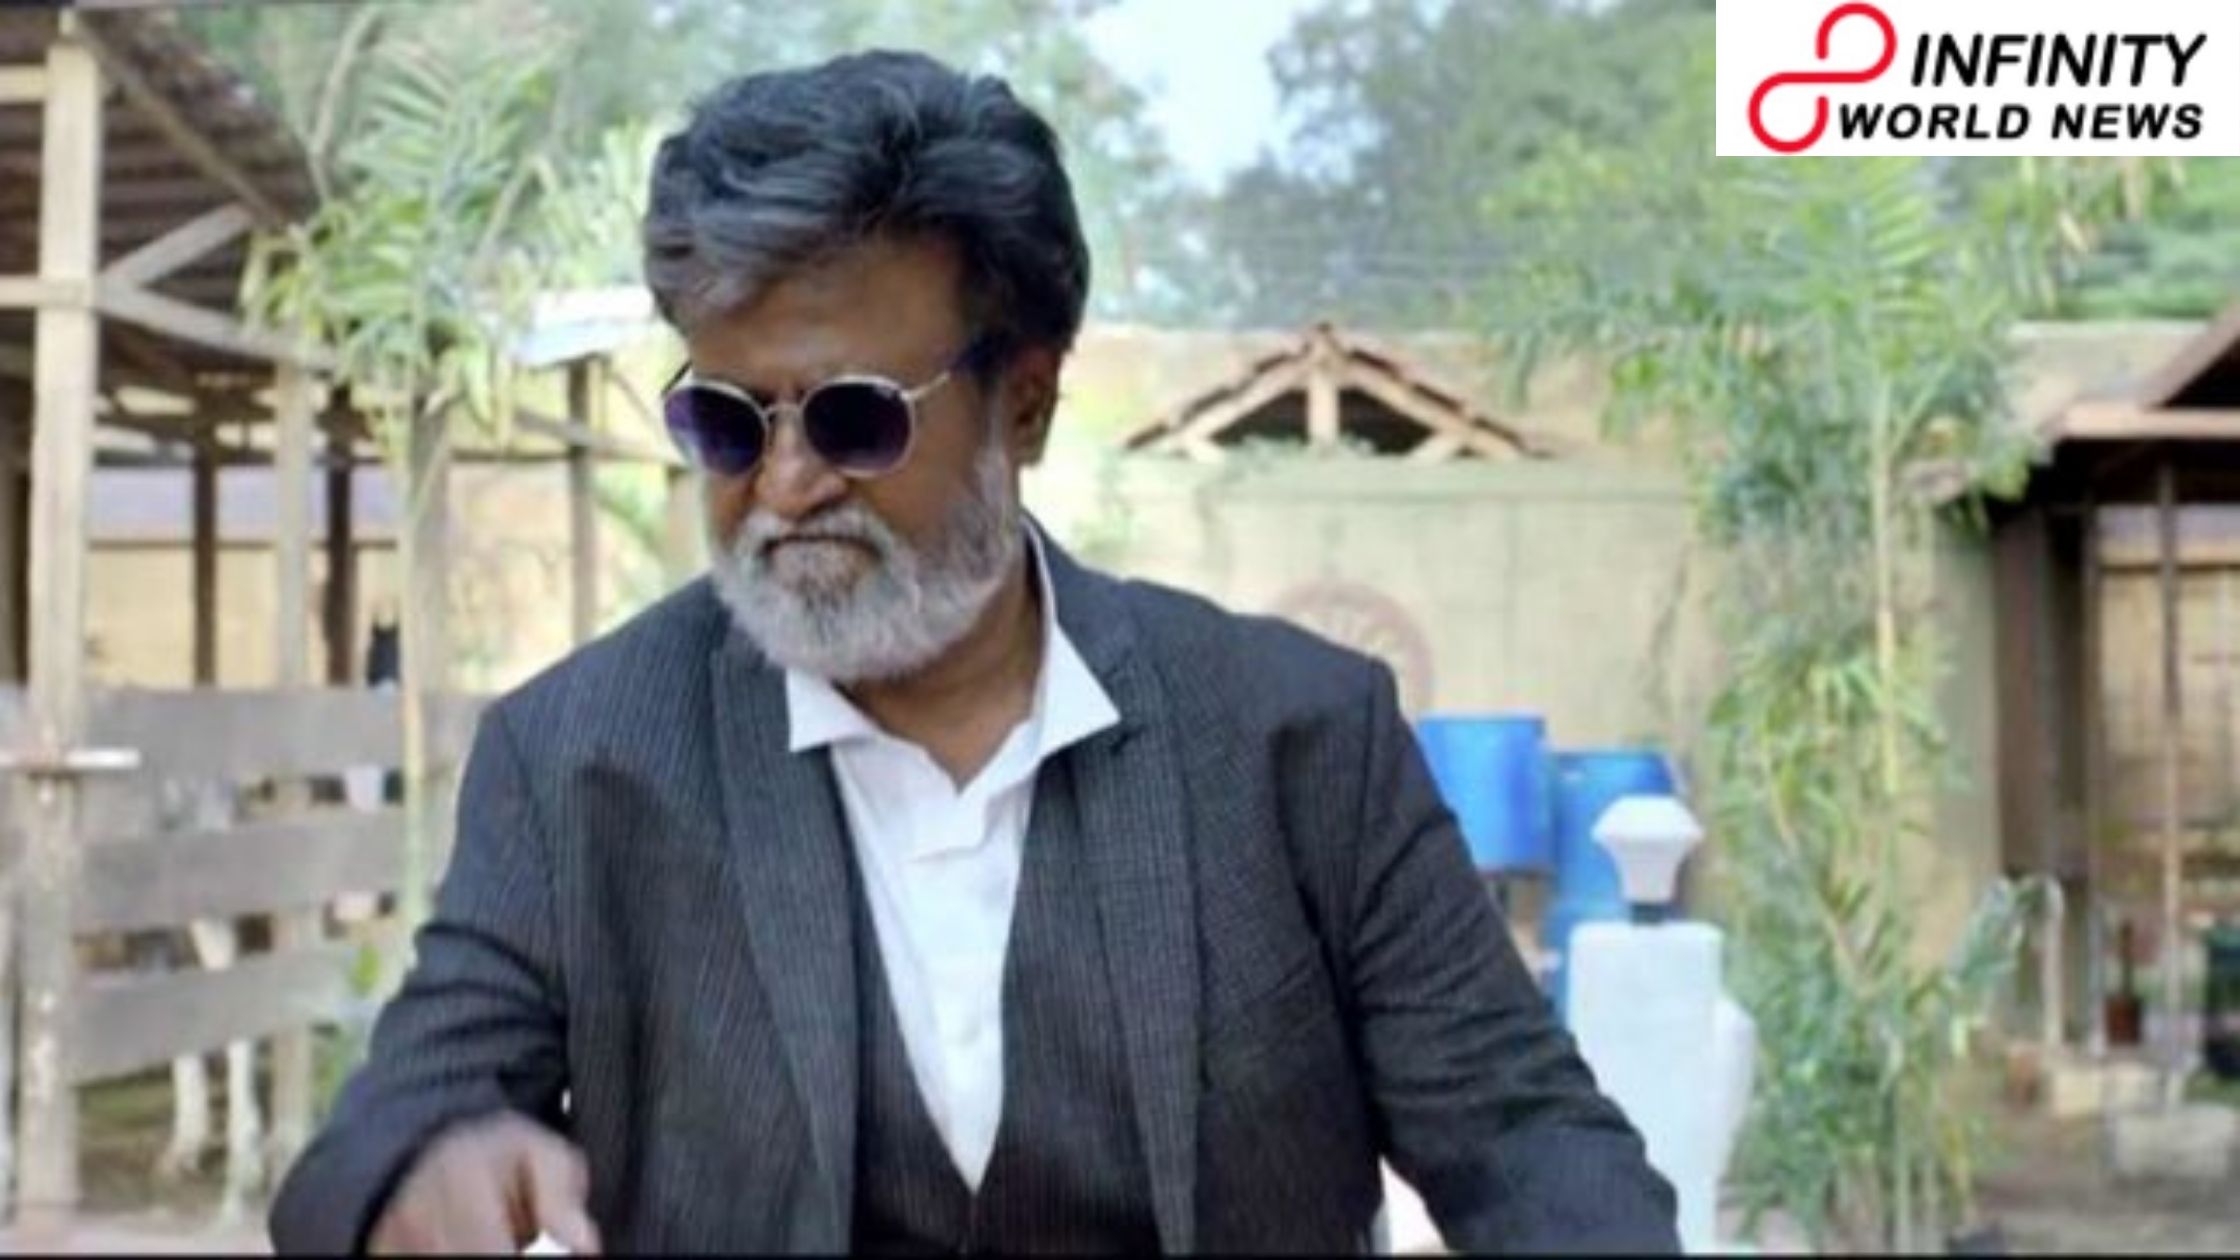 Rajinikanth's Entry within Politics Will Not Have Any Impact, Says Tamil Nadu Minister